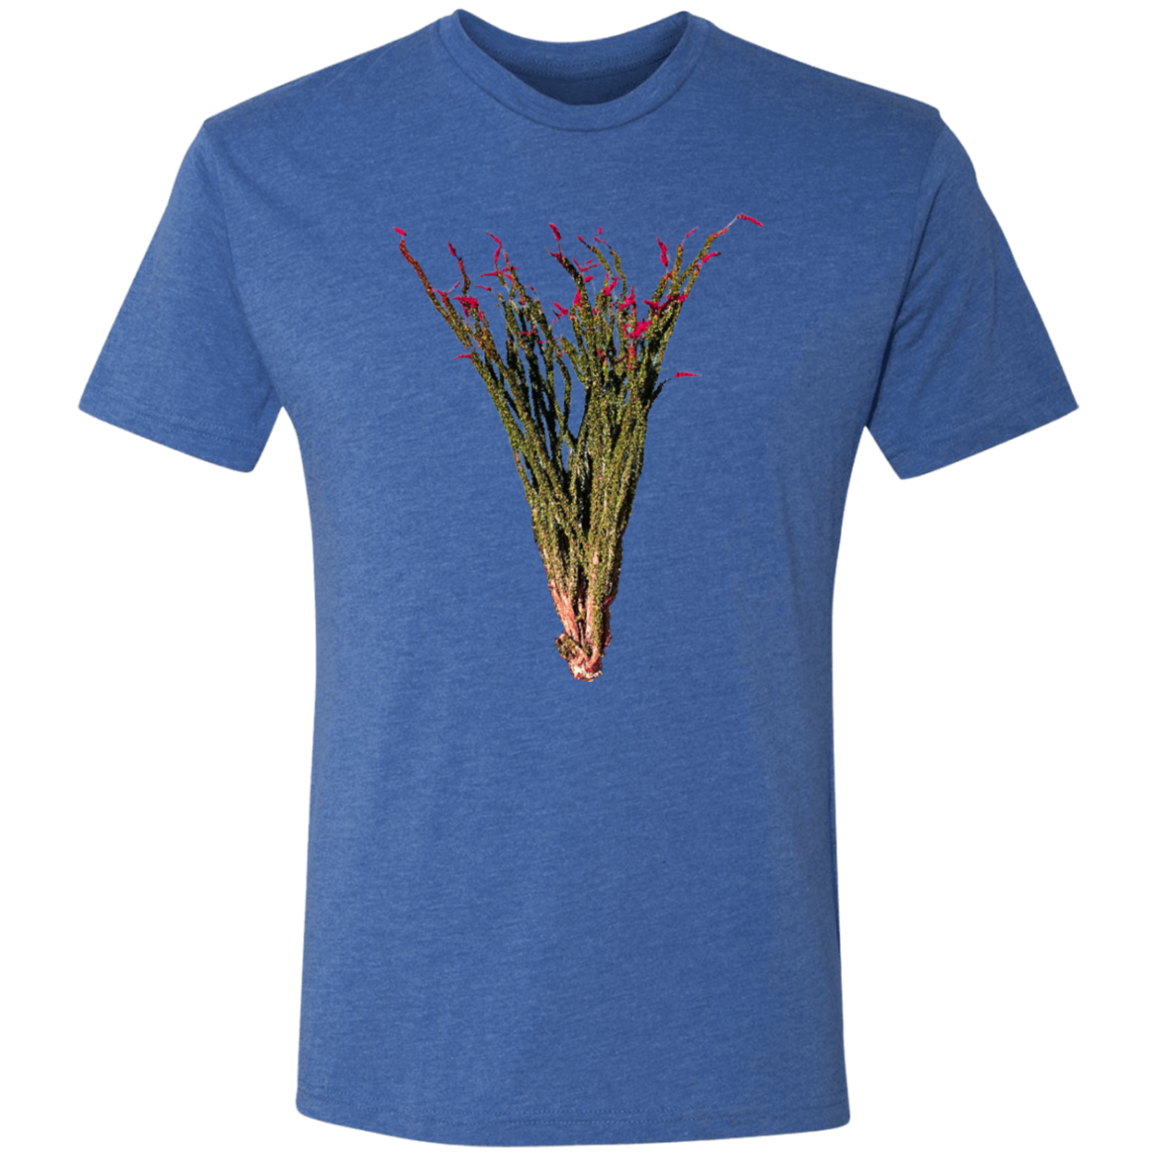 The Ocotillo in Color - Premium Triblend T-Shirt